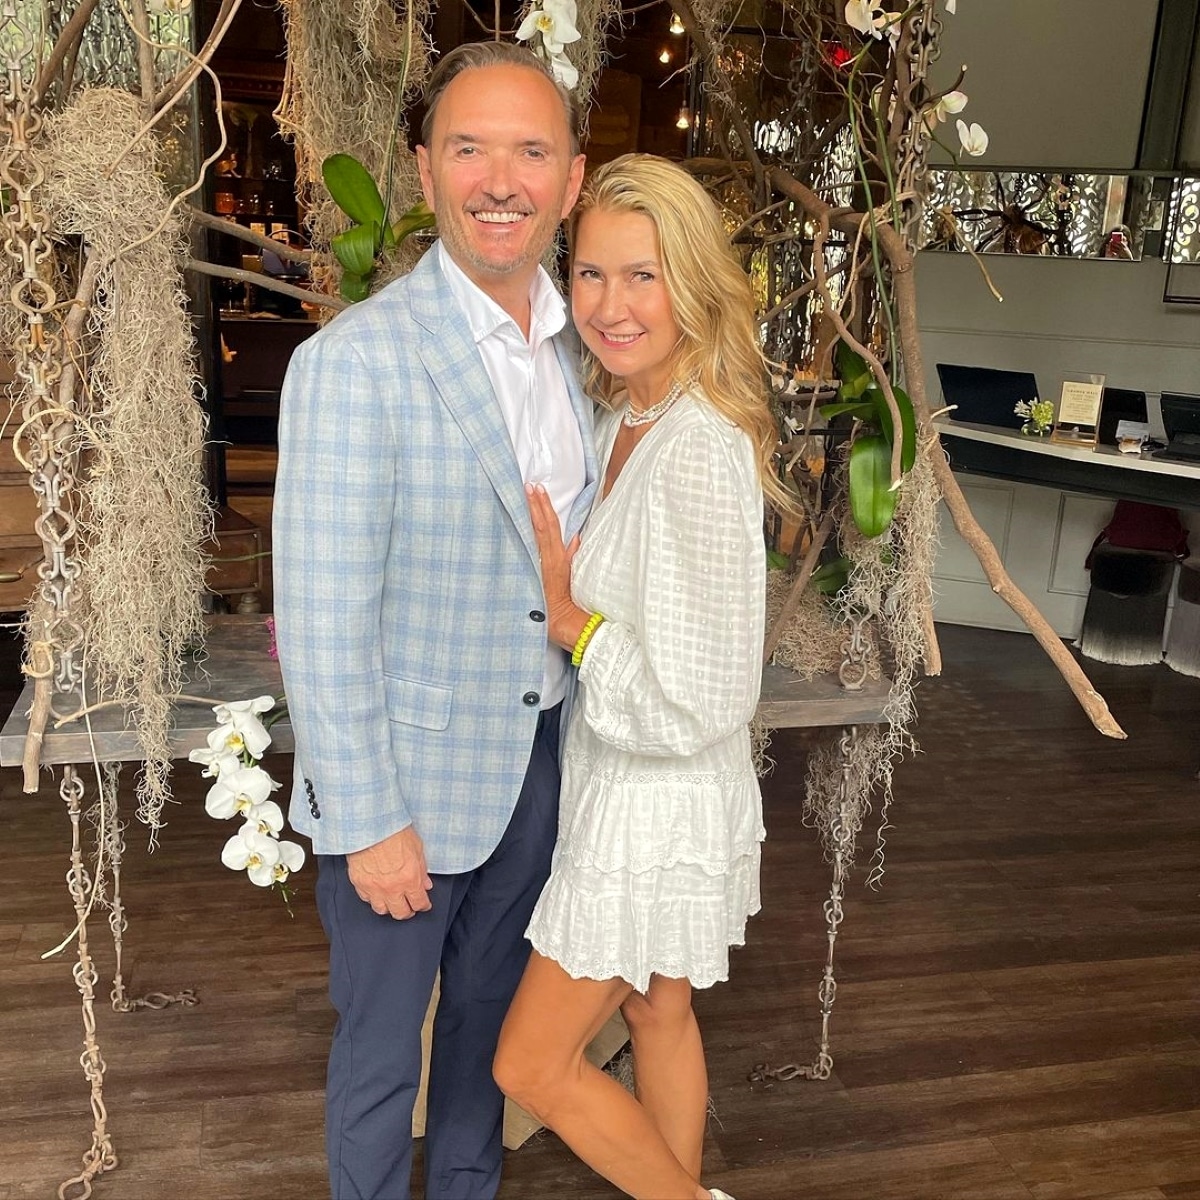 PHOTOS: RHOD Star Kary Brittingham Marries Mark A. Anderson in Italy, See Pics of Their Romantic Outdoor Ceremony as the Cast Reacts